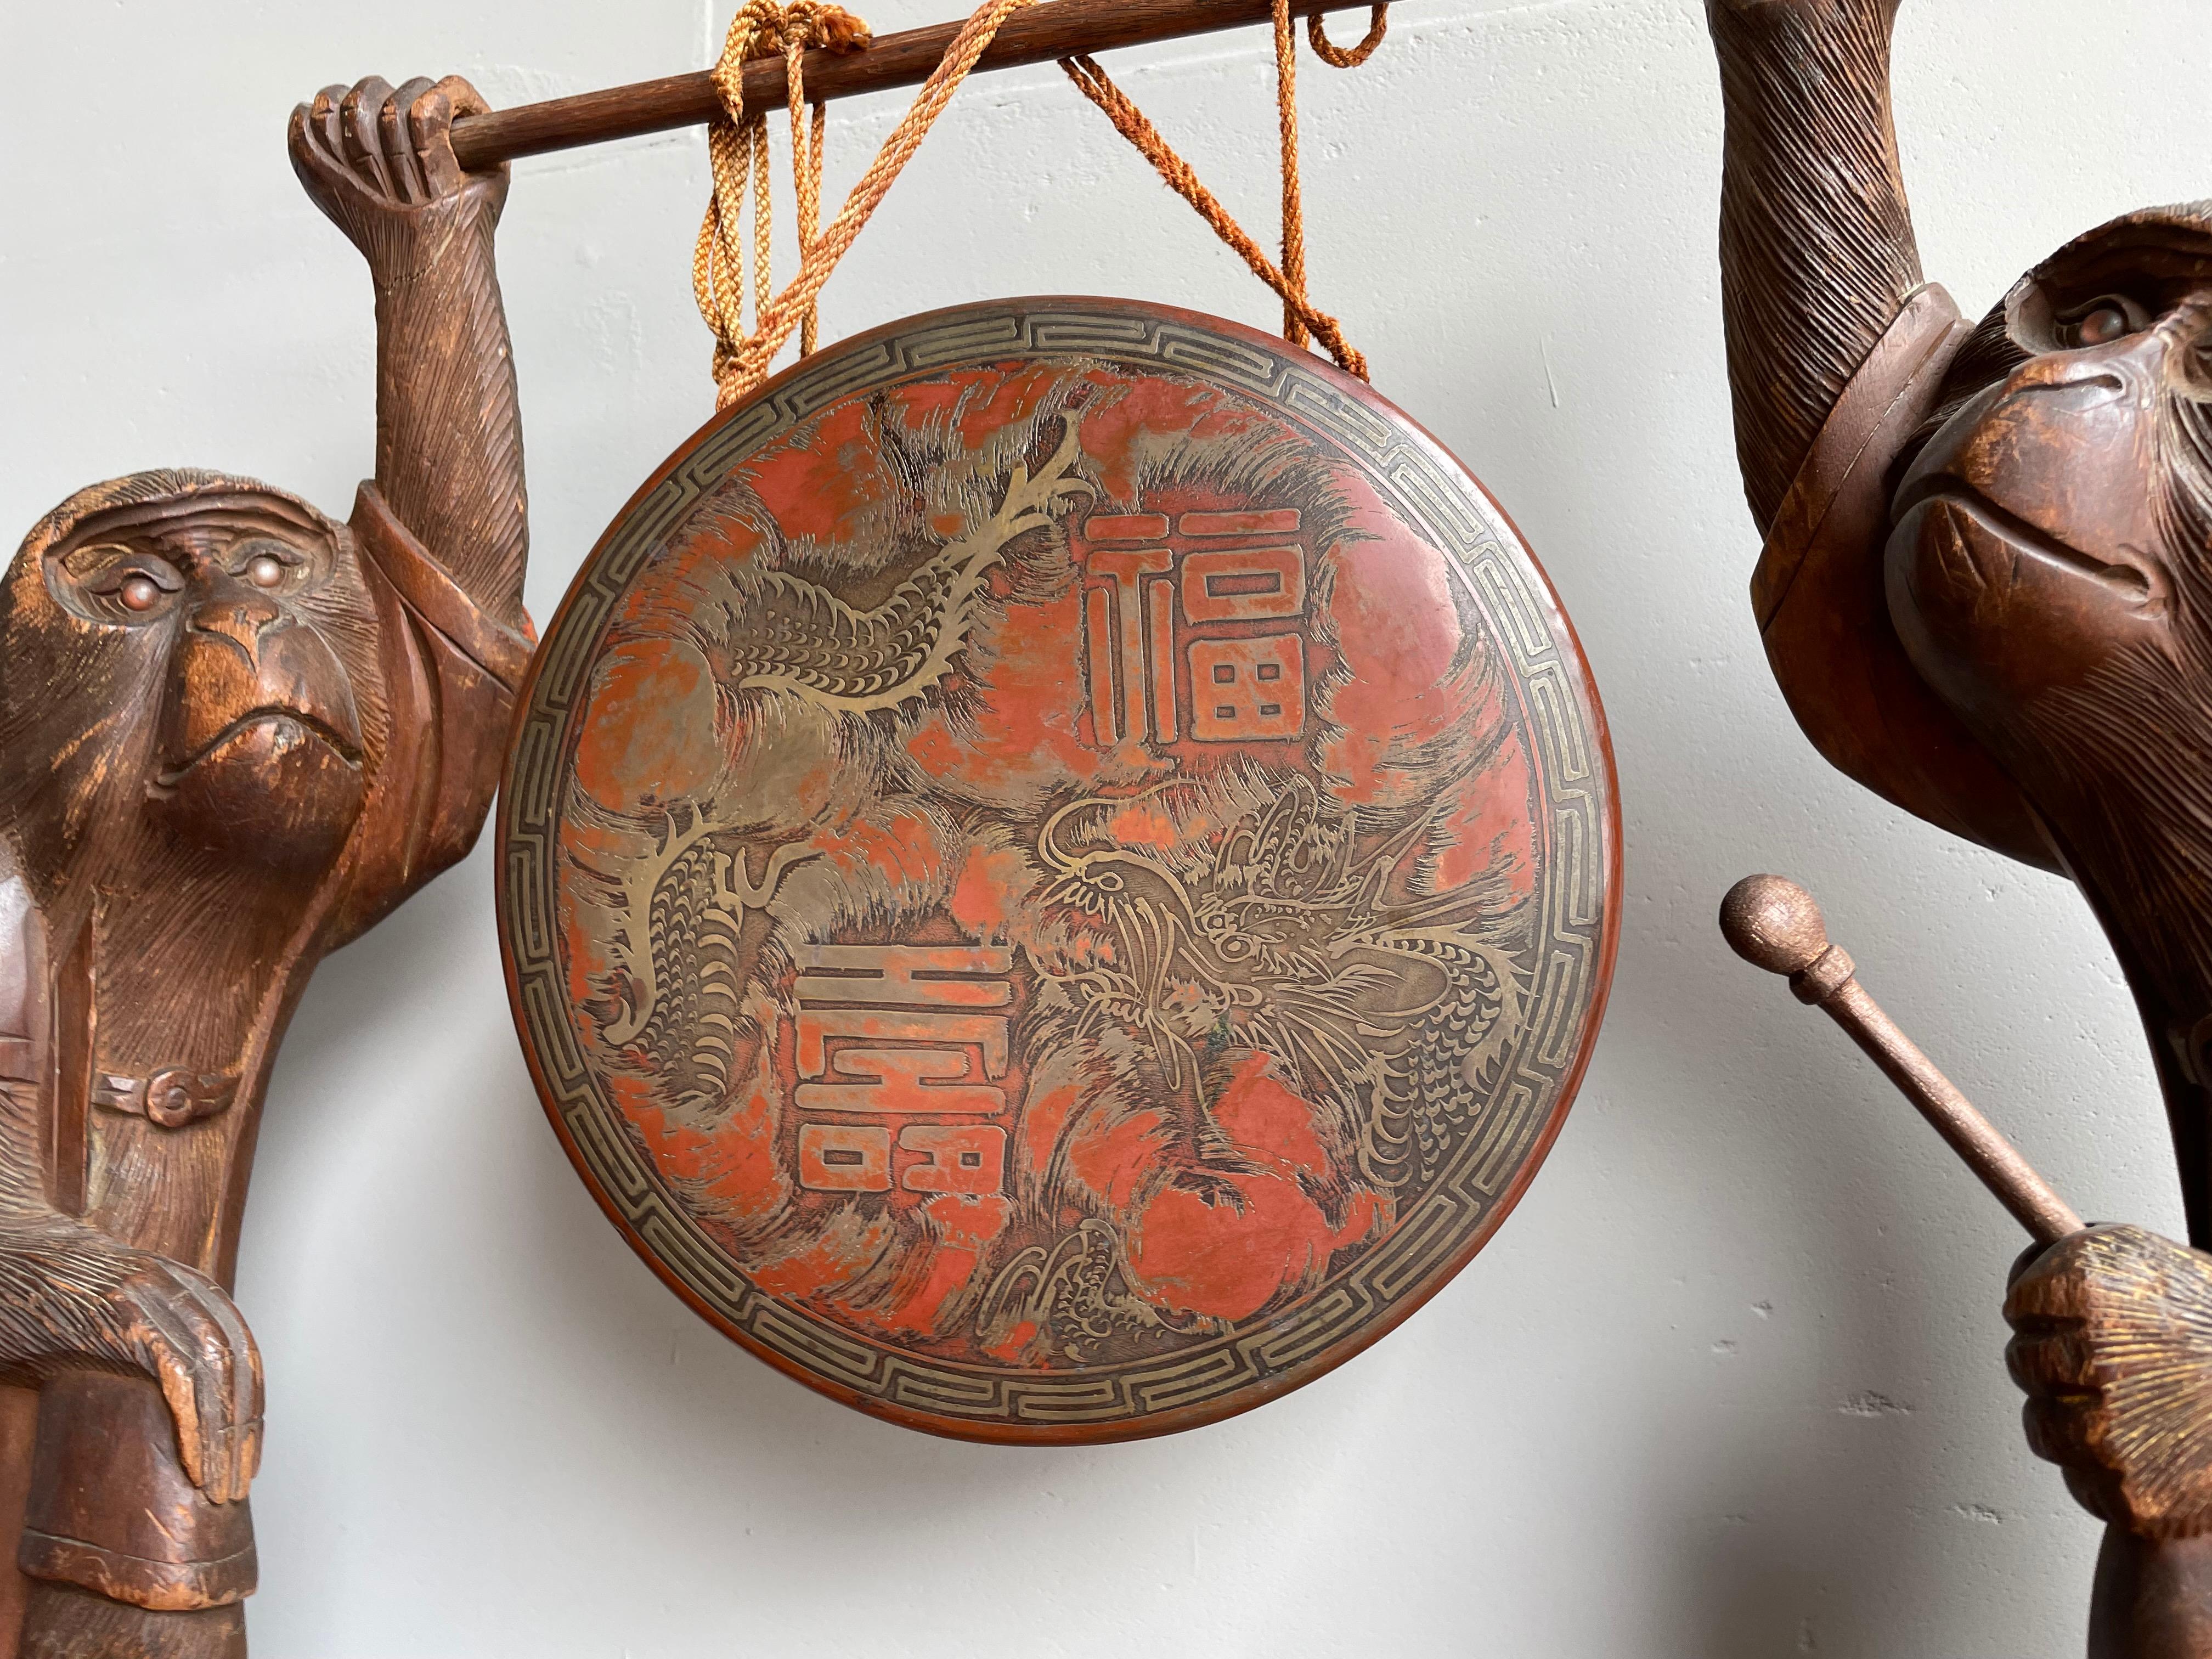 Hammered Antique Chinese Table Gong Held Up by Two Hand Carved Wooden Monkey Sculptures